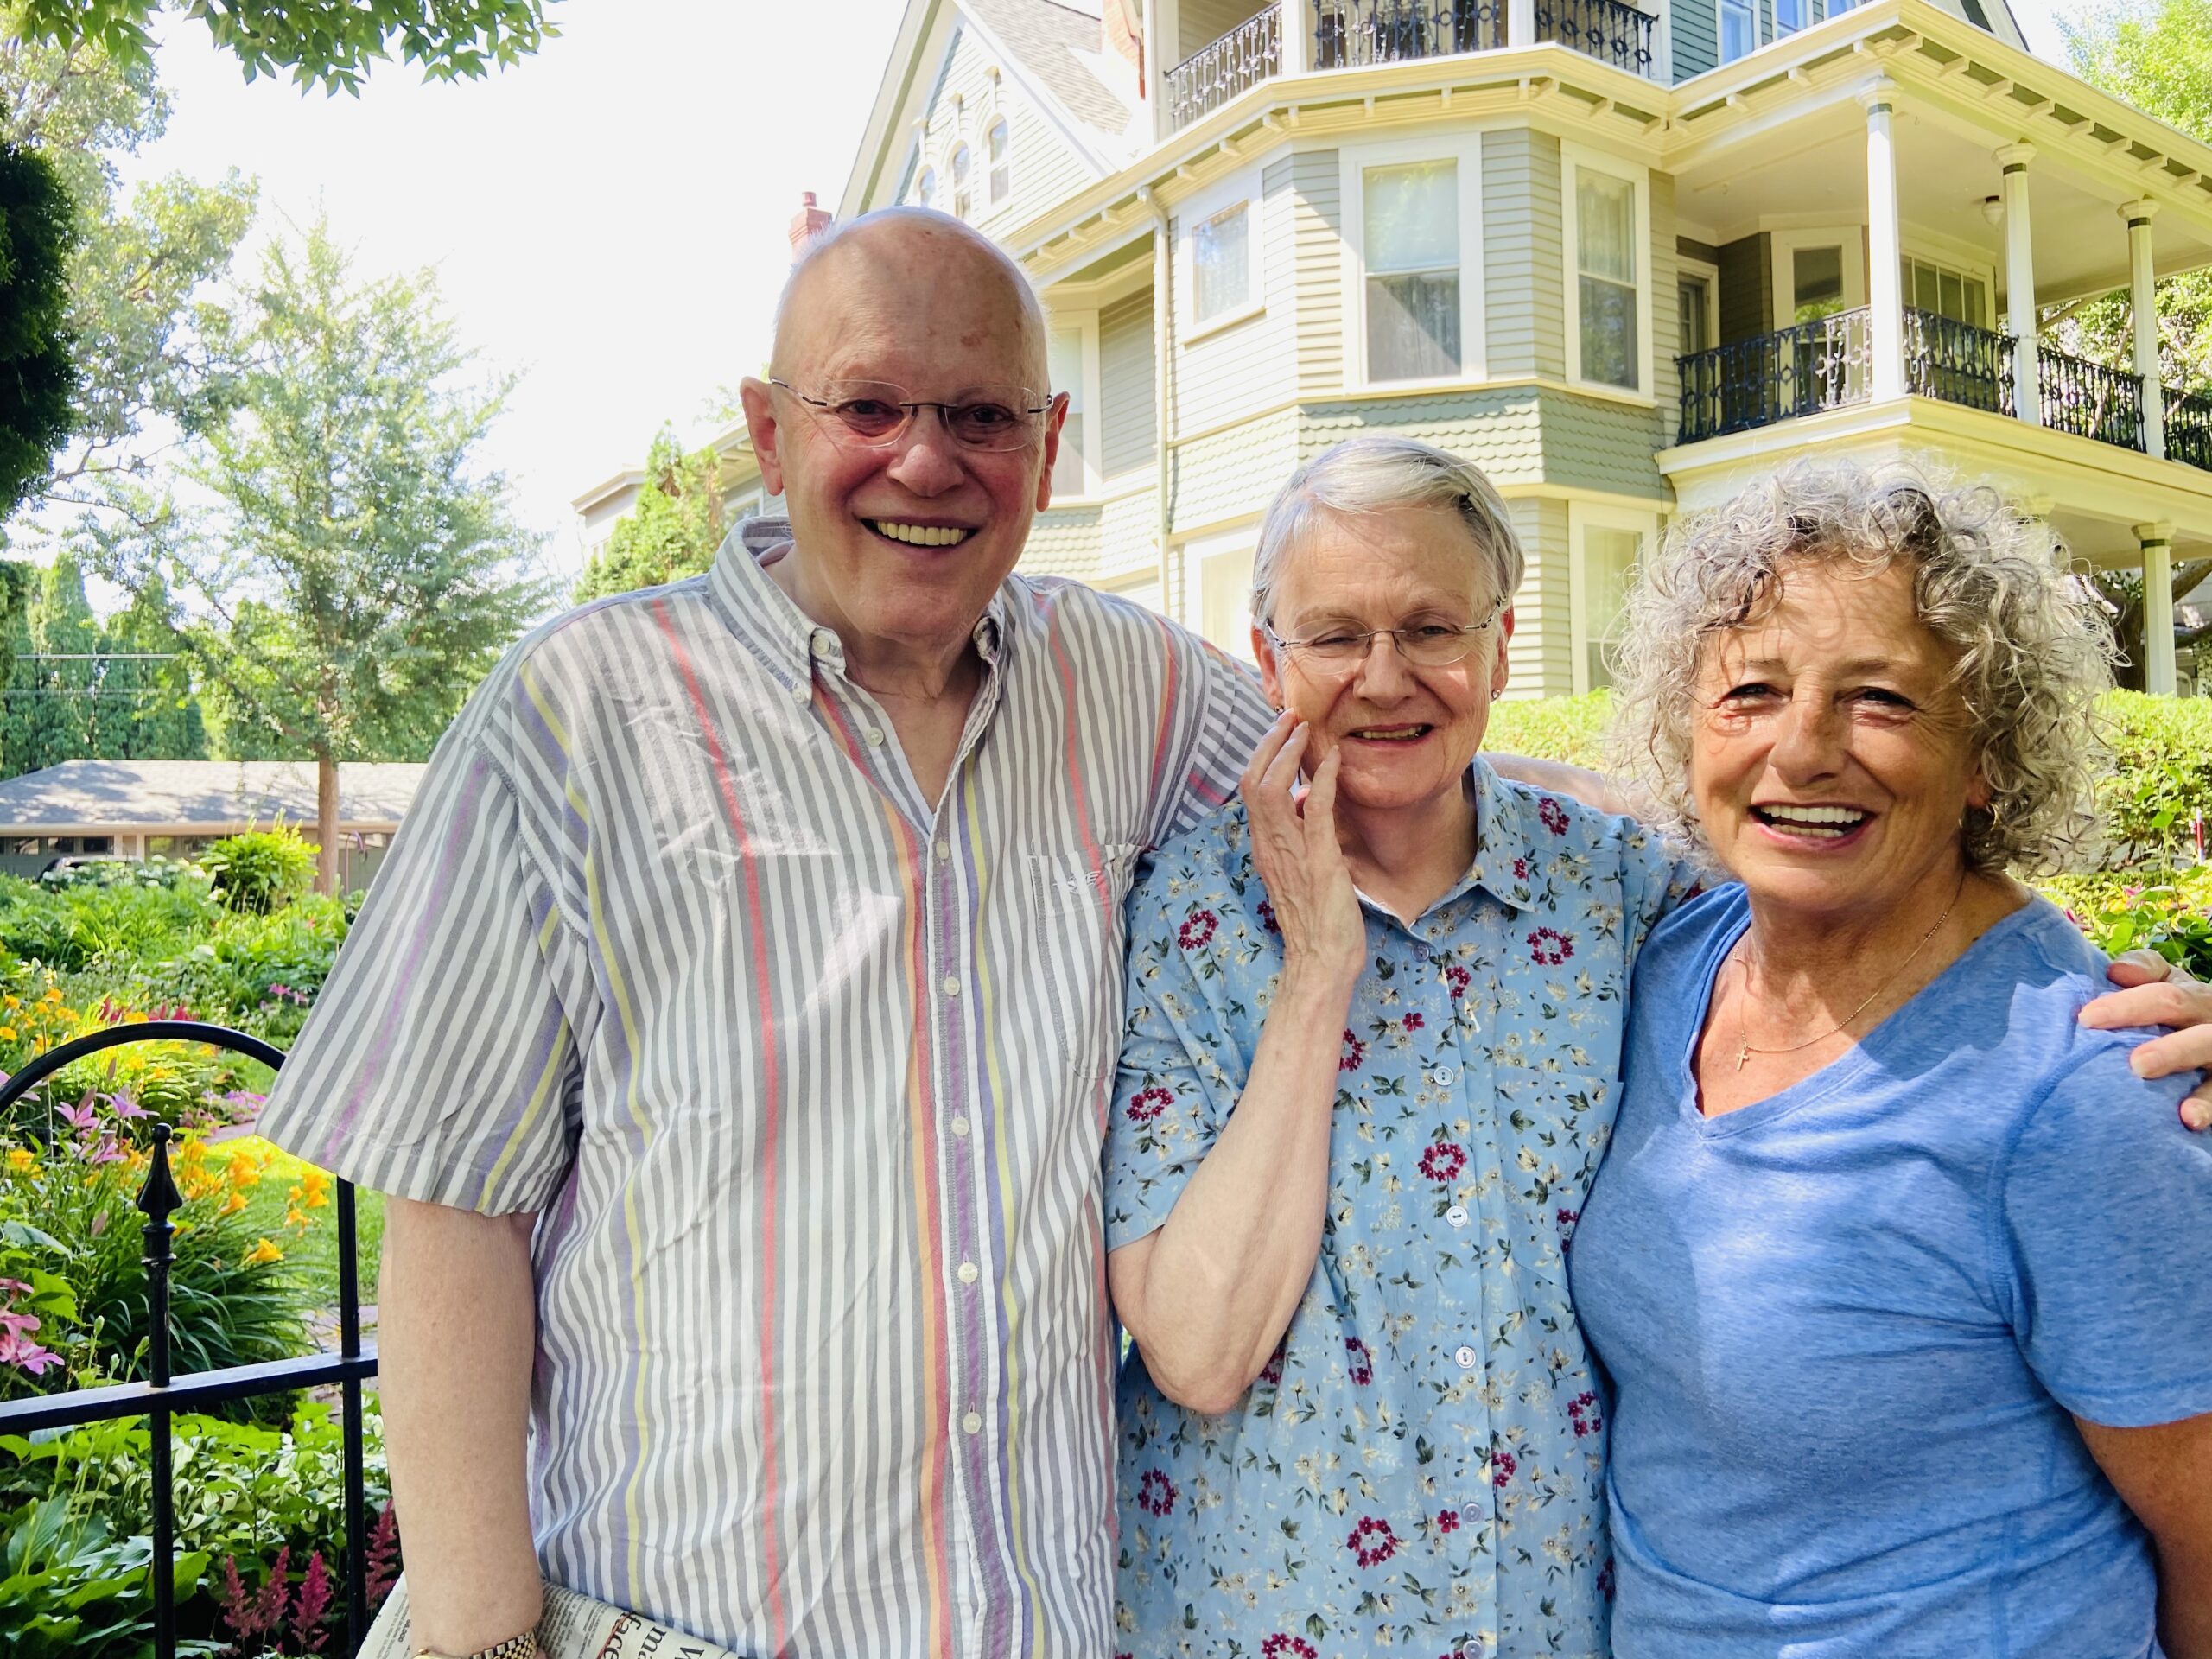 assisted living communities in Minnesota